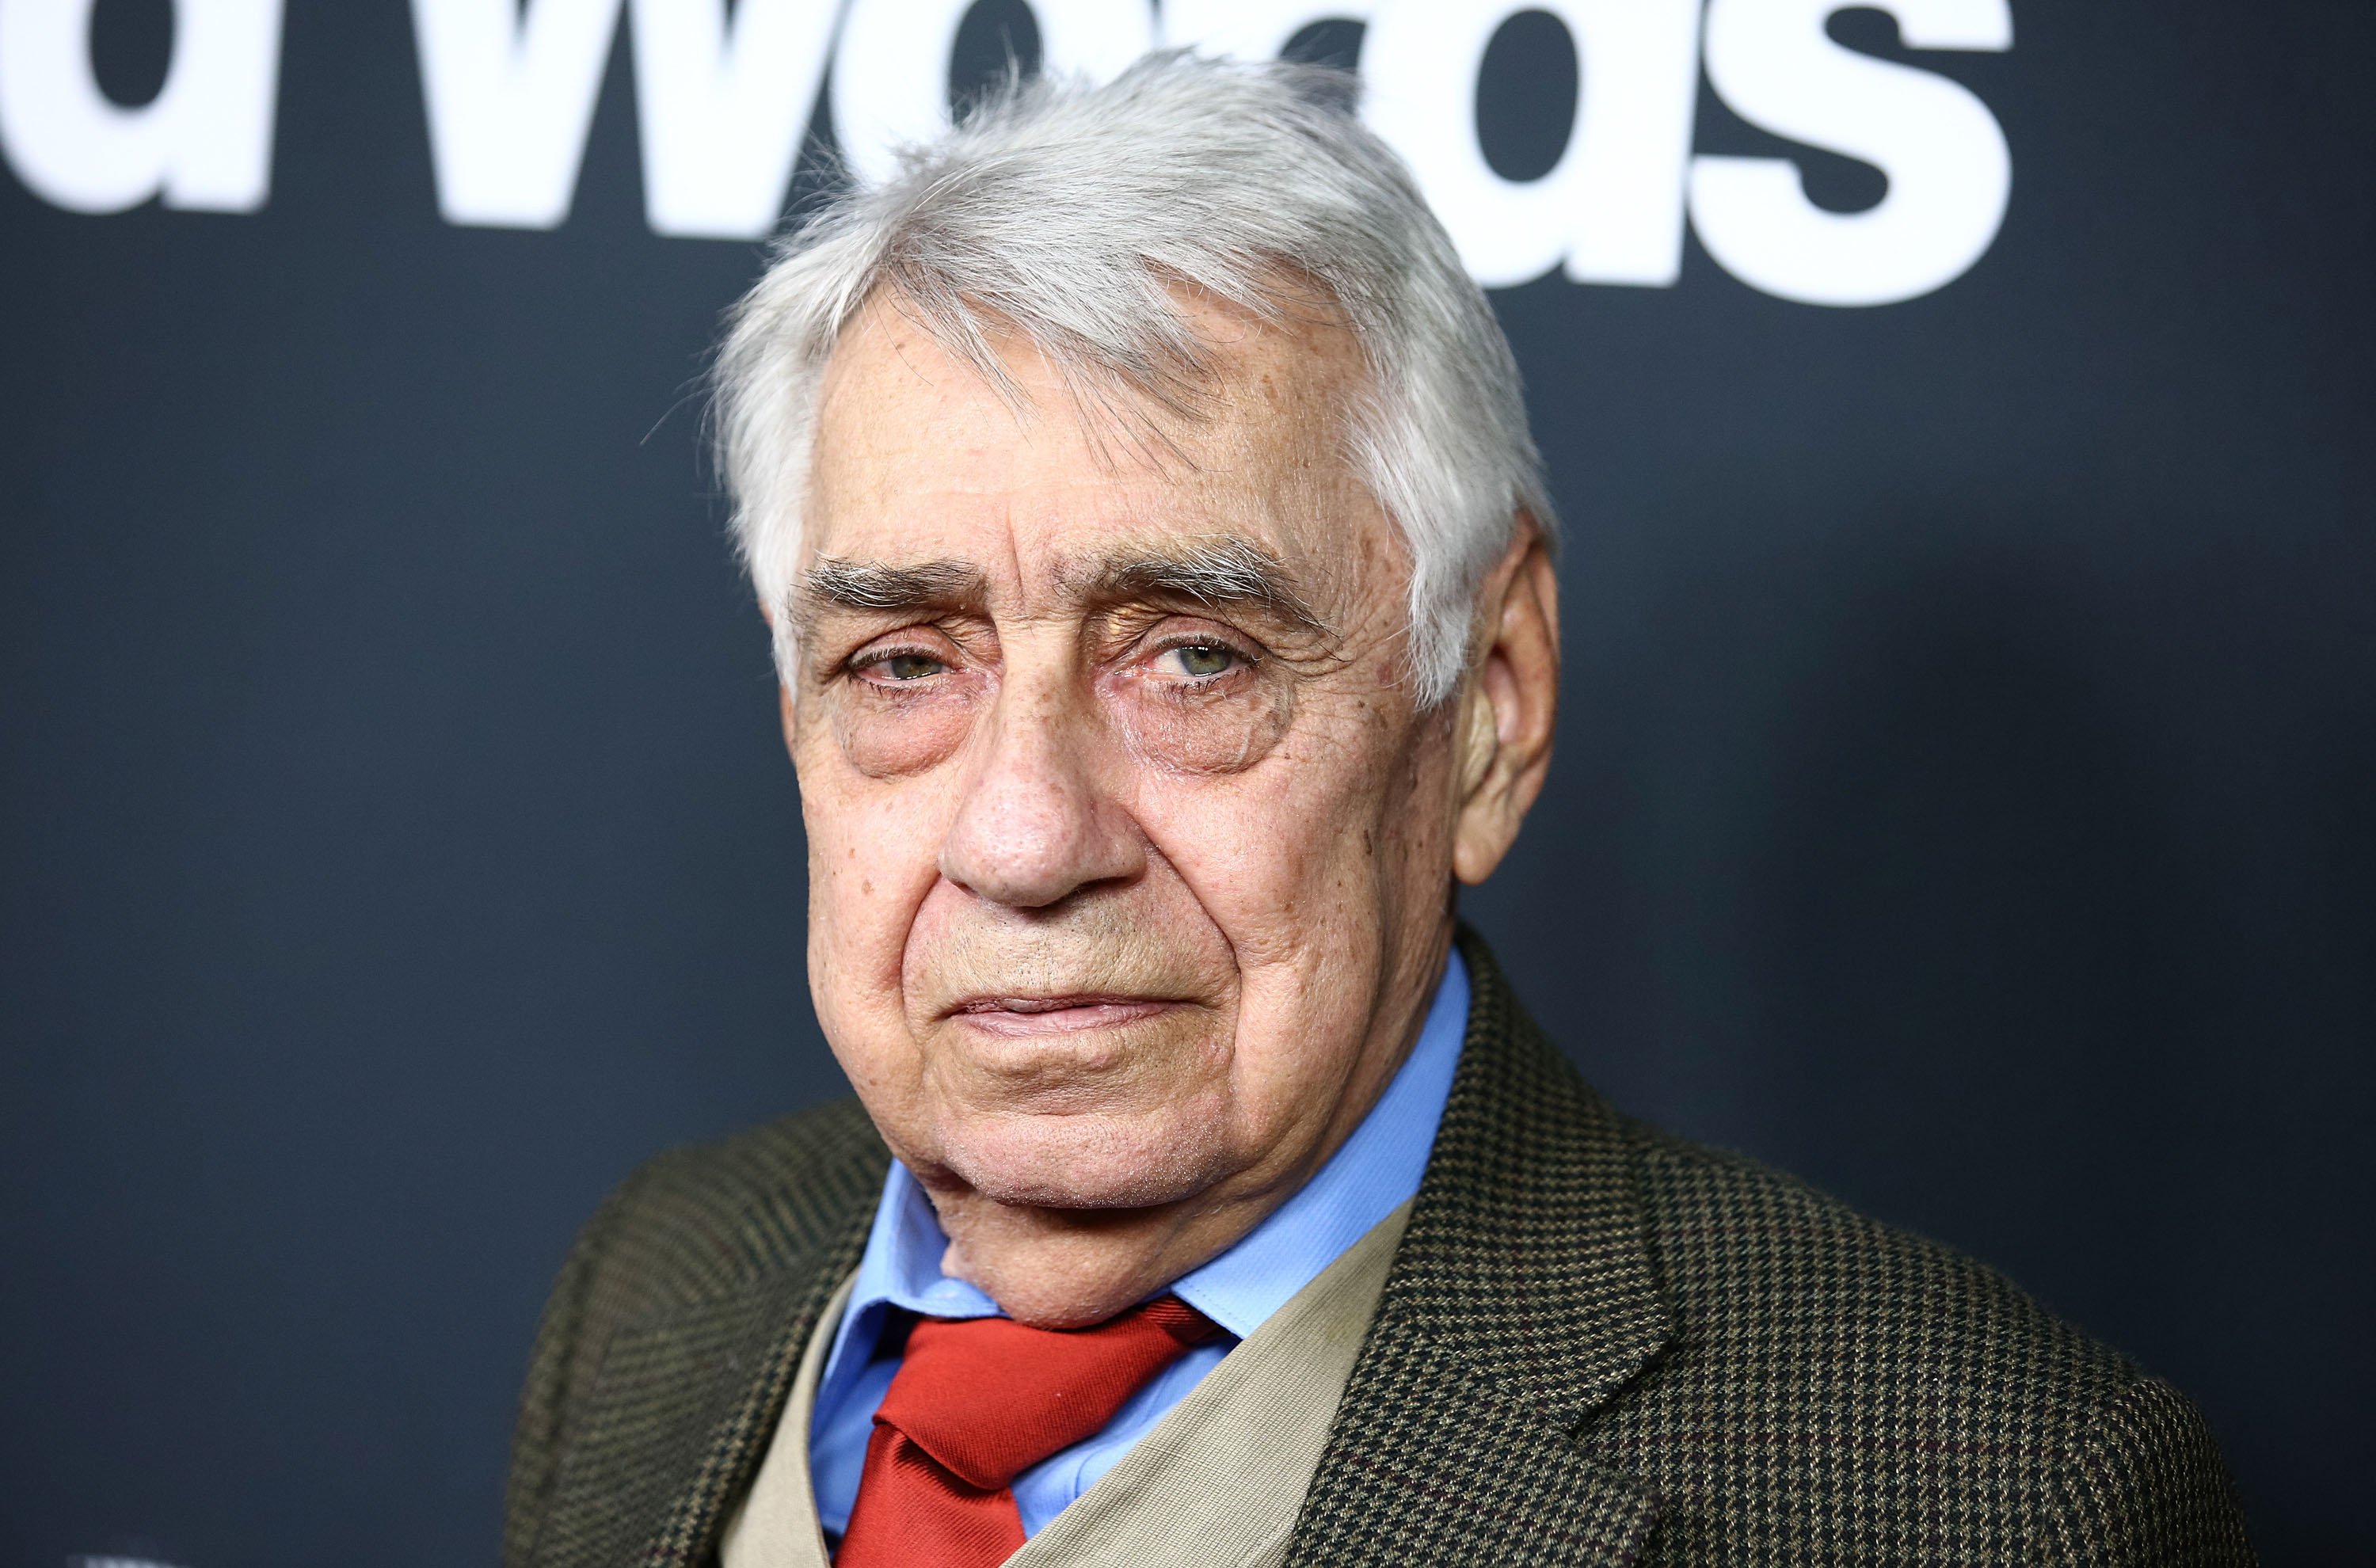  Philip Baker Hall at the premiere of Focus Features' "Bad Words" on March 5, 2014 in Hollywood. | Source: Getty Images